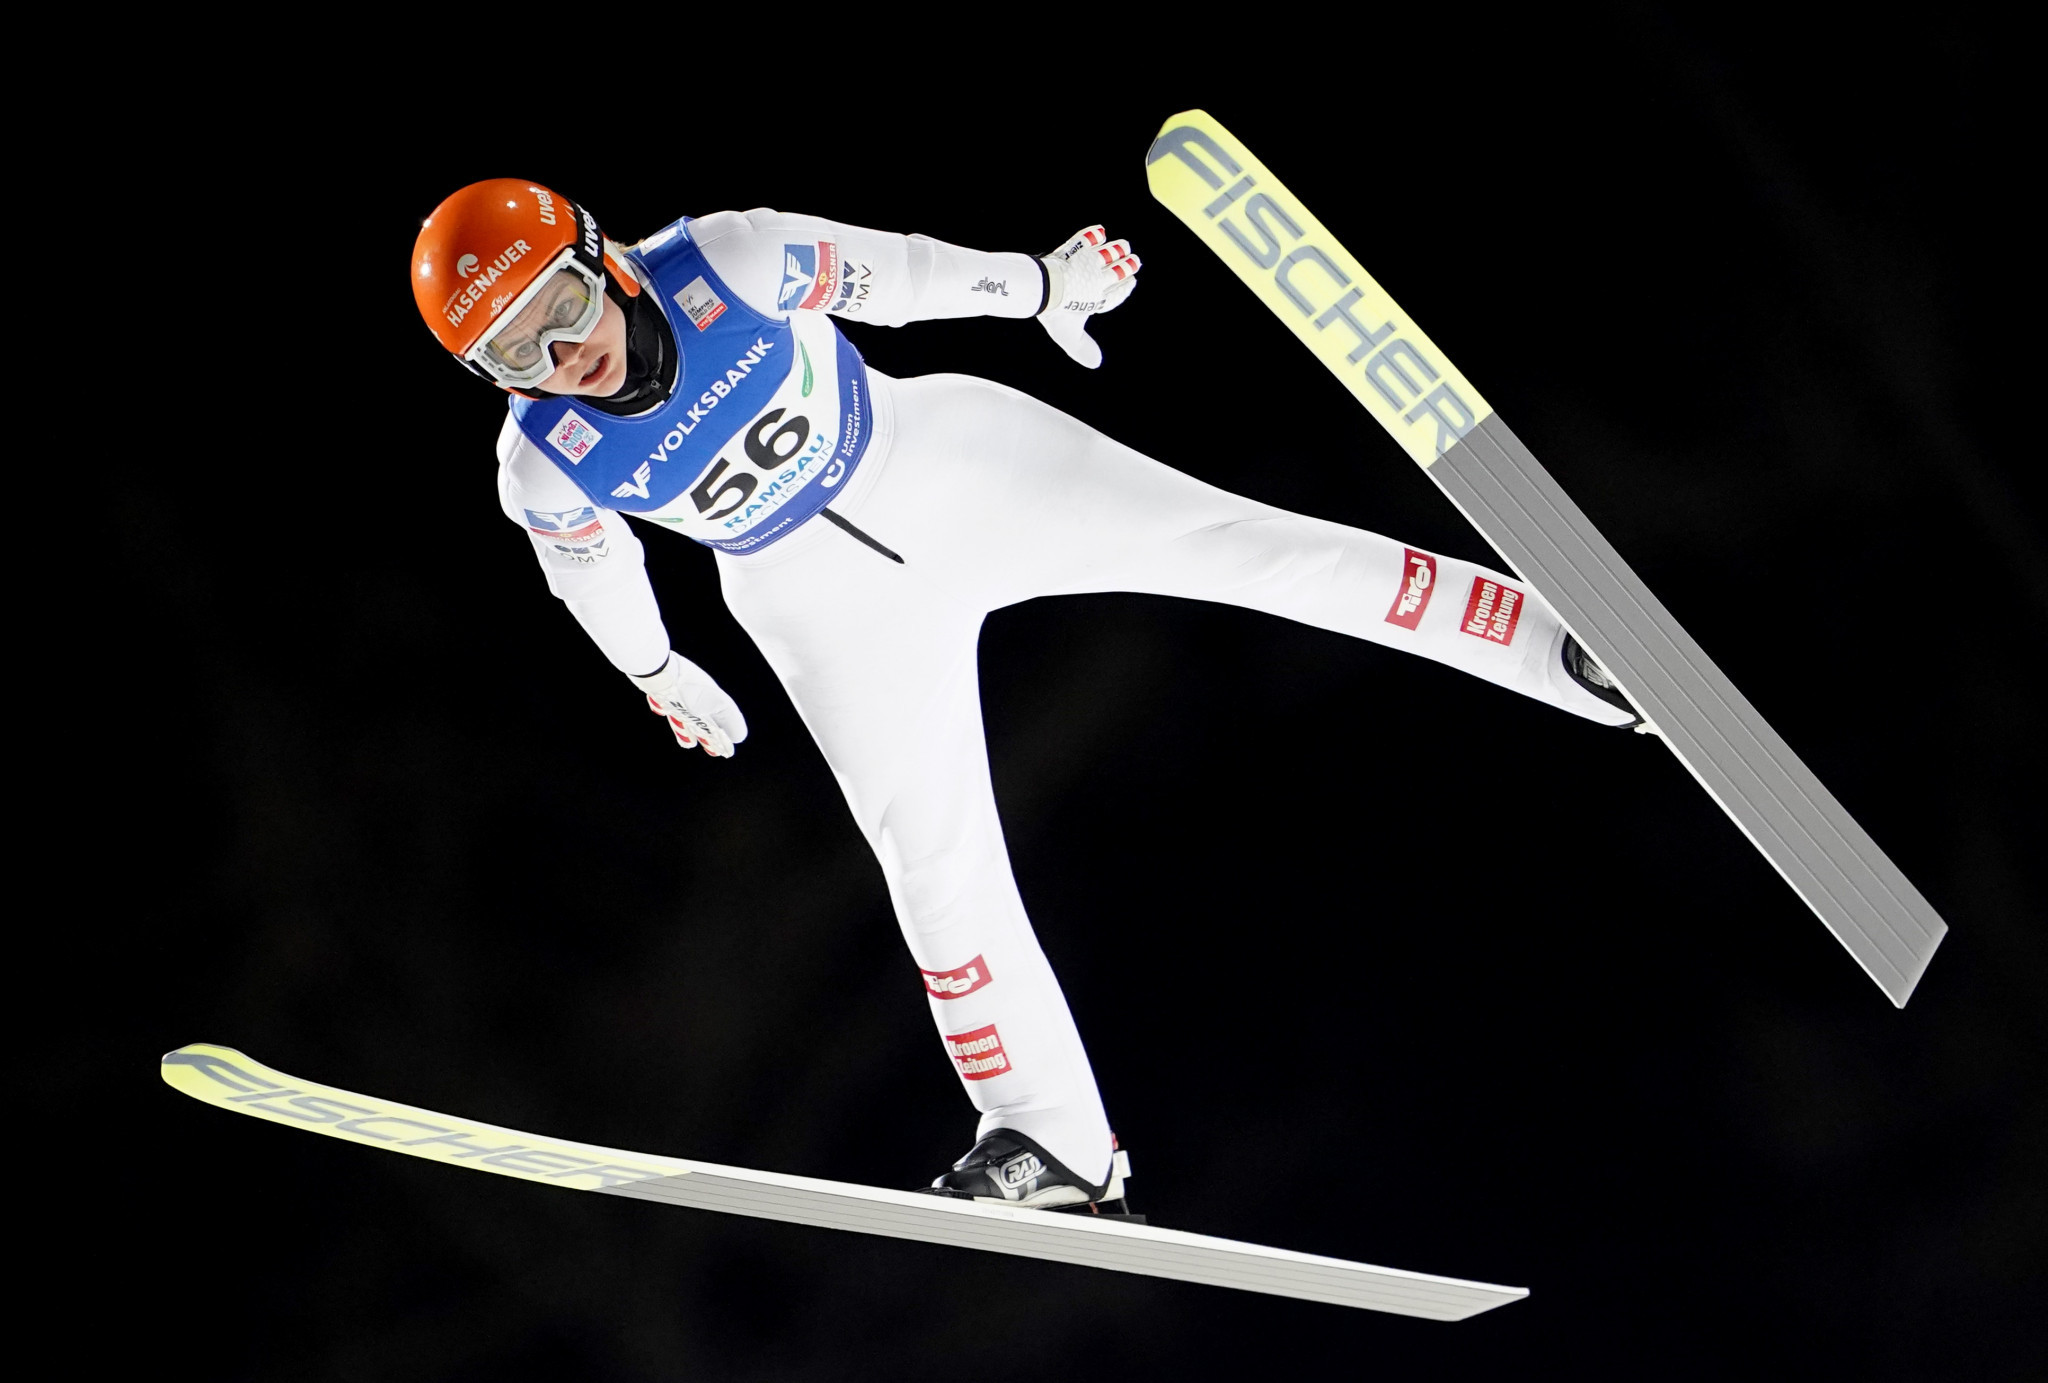 Marita Kramer has now won three of this season's four FIS Ski Jumping World Cup events ©Getty Images